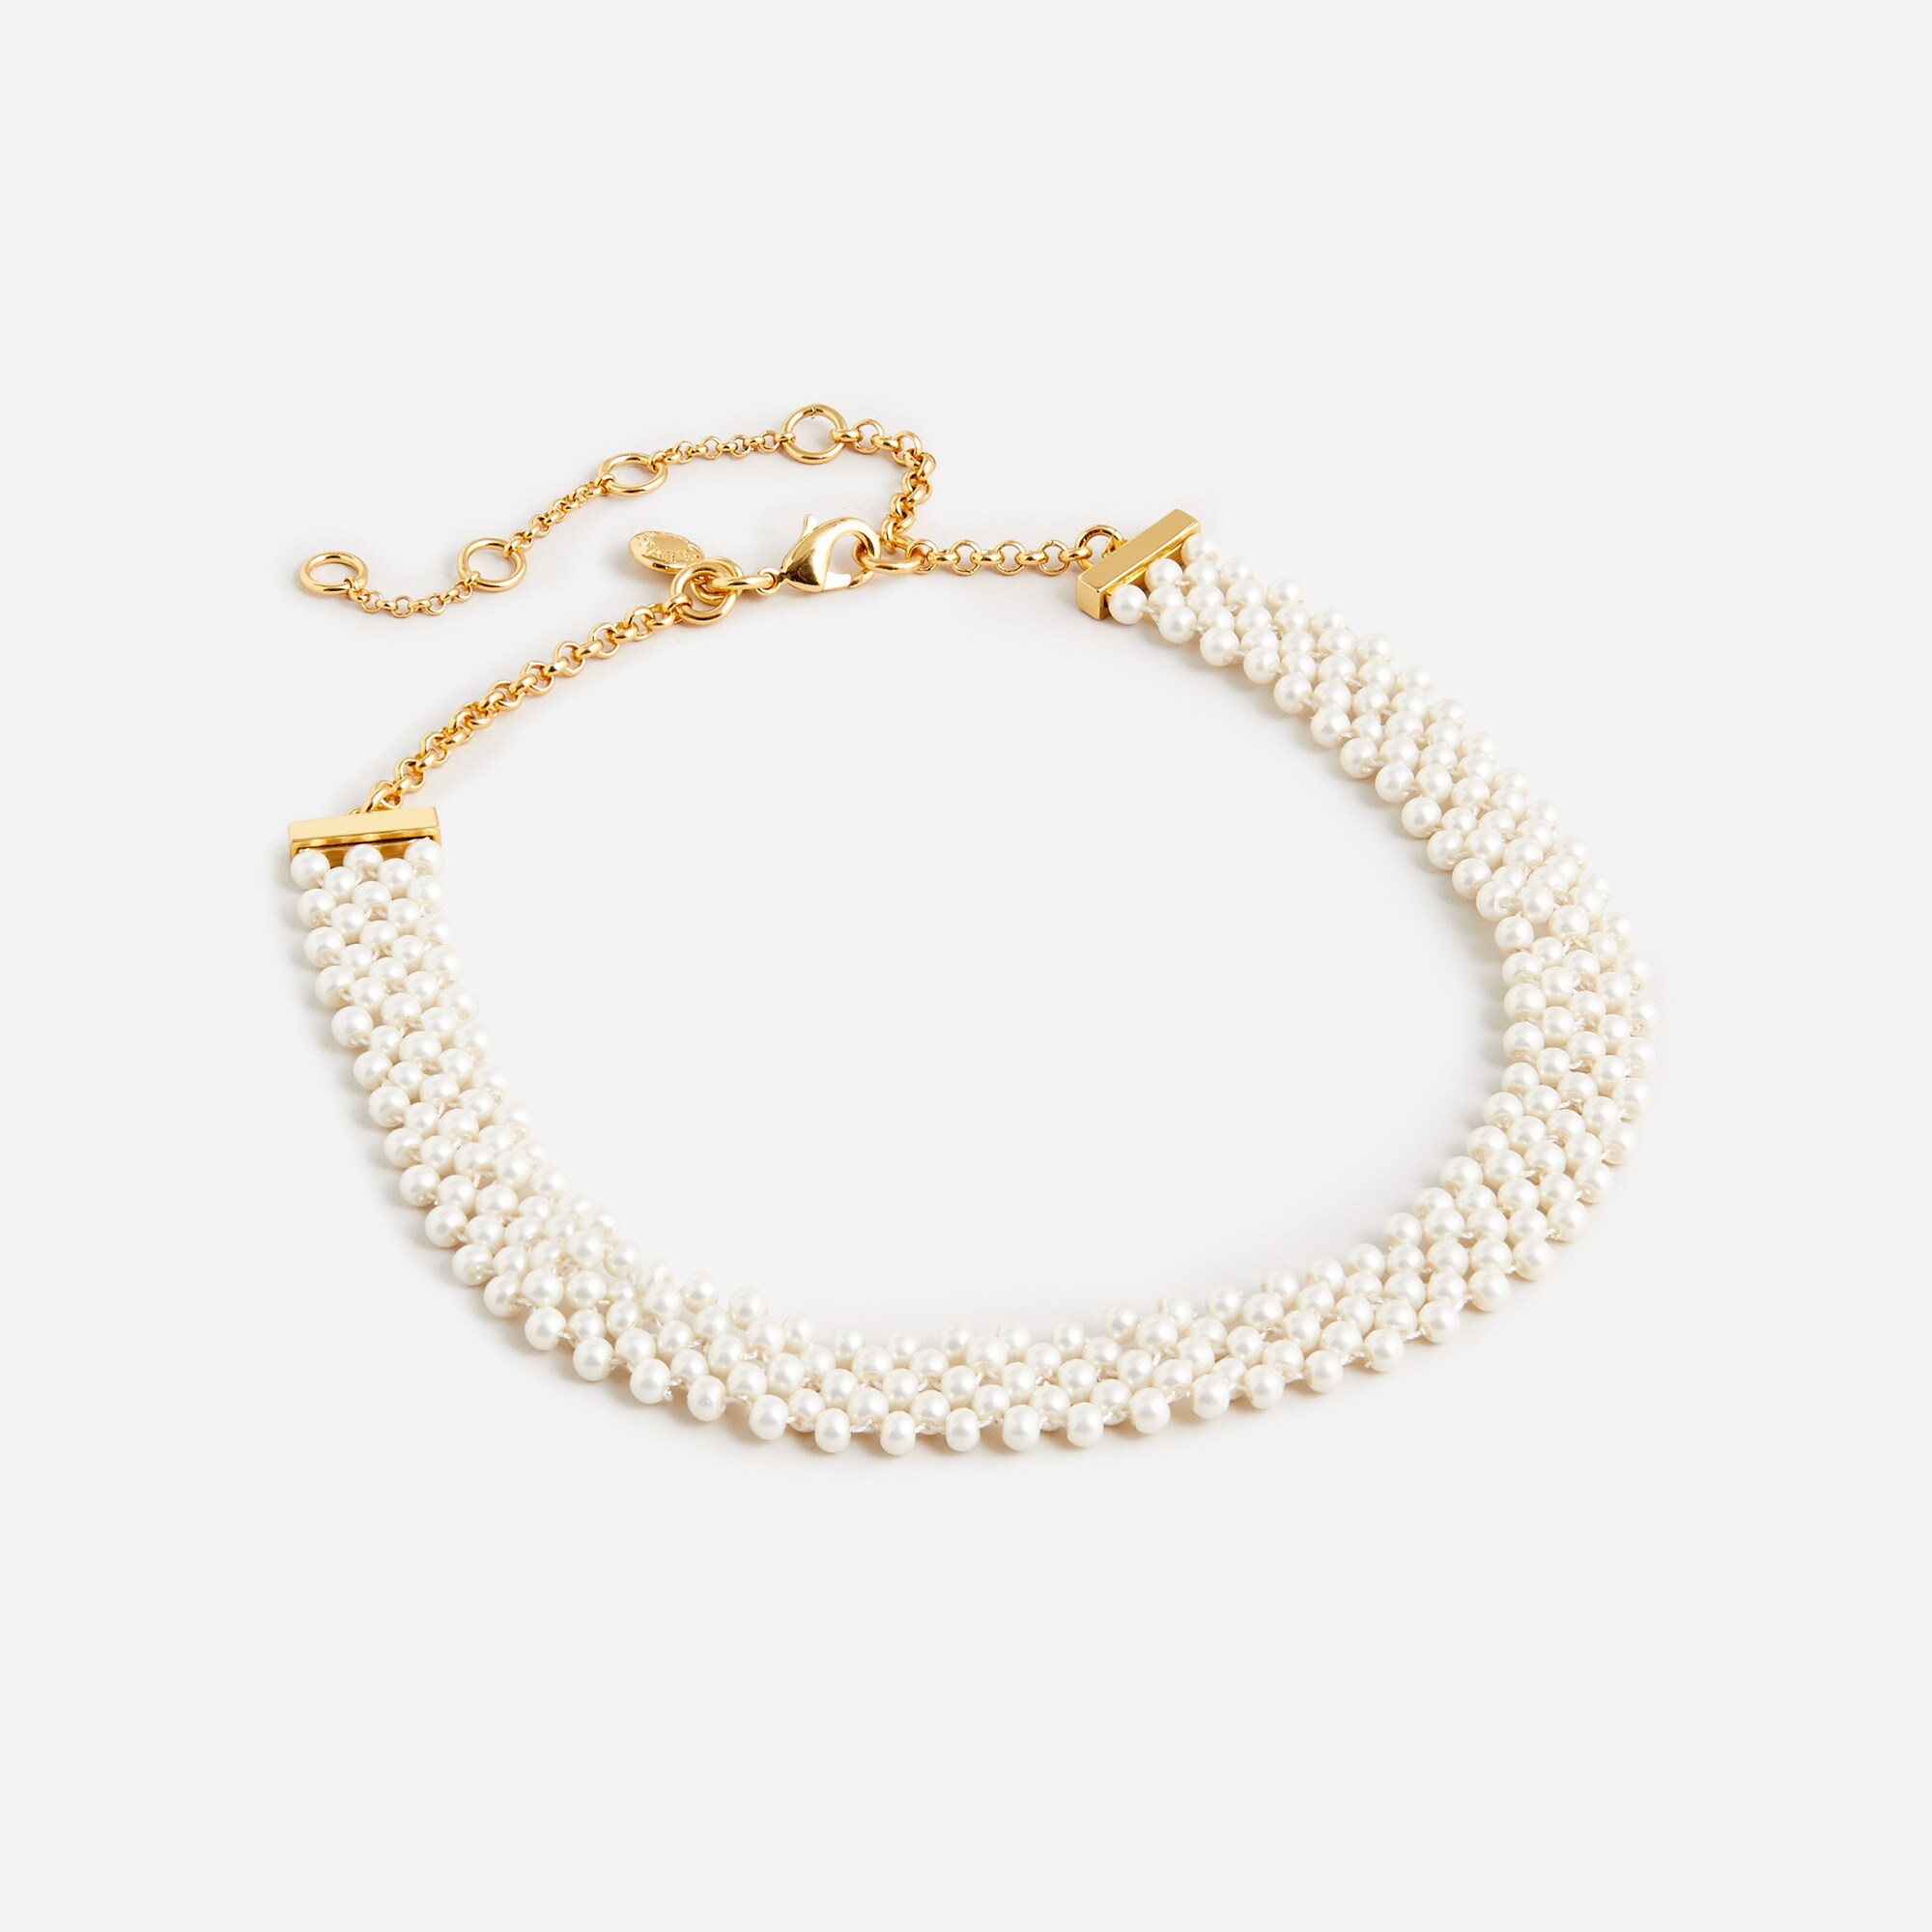 J.Crew: Woven Pearl Choker Necklace For Women